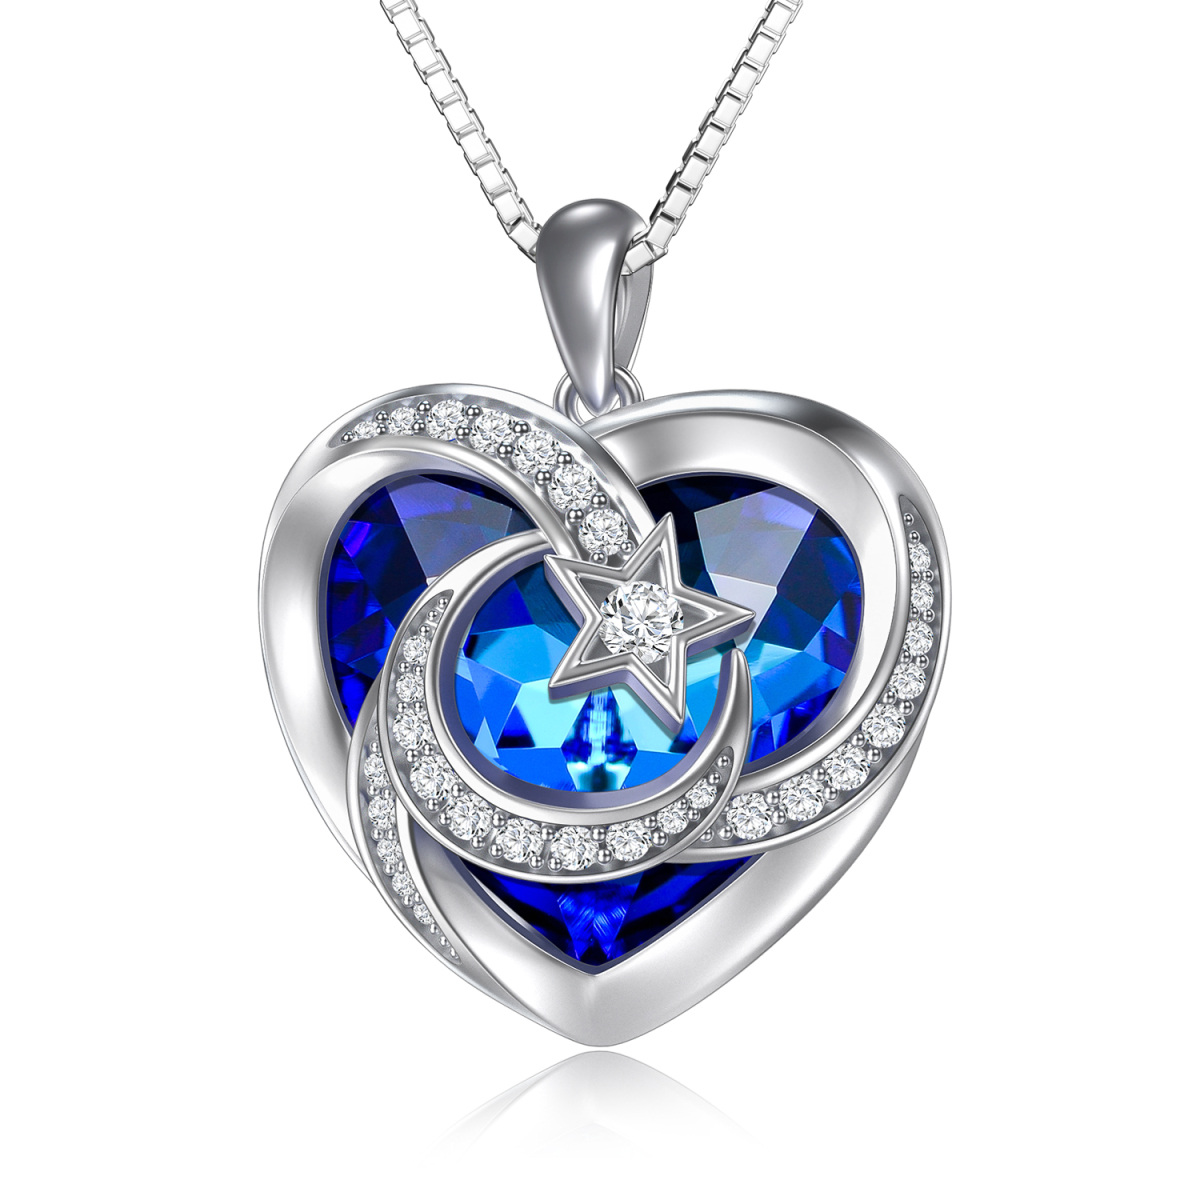 Sterling Silver Heart Shaped Heart & Moon Crystal Pendant Necklace-1